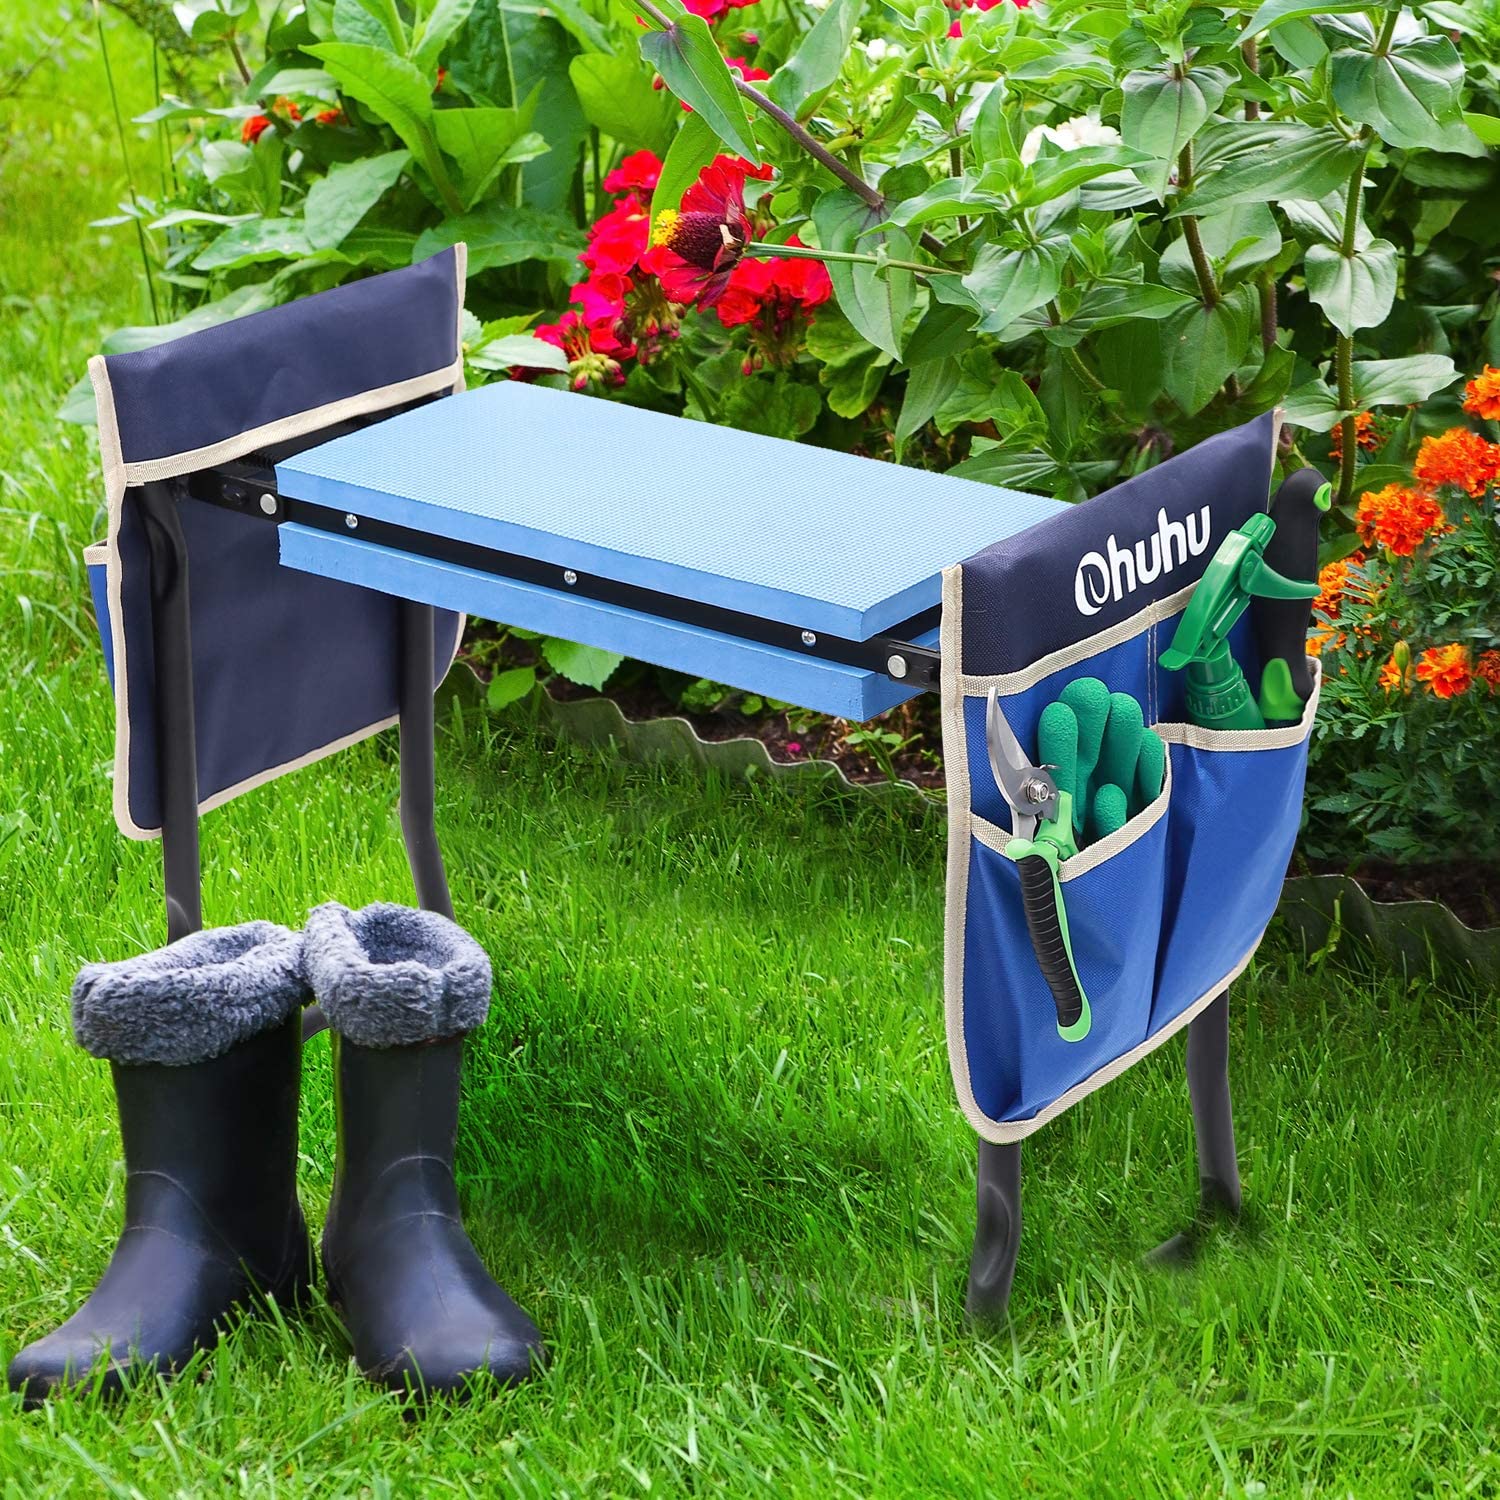 Ohuhu Garden Kneeler and Seat with 2 Bonus Tool Pouches Foldable Garden Bench S 